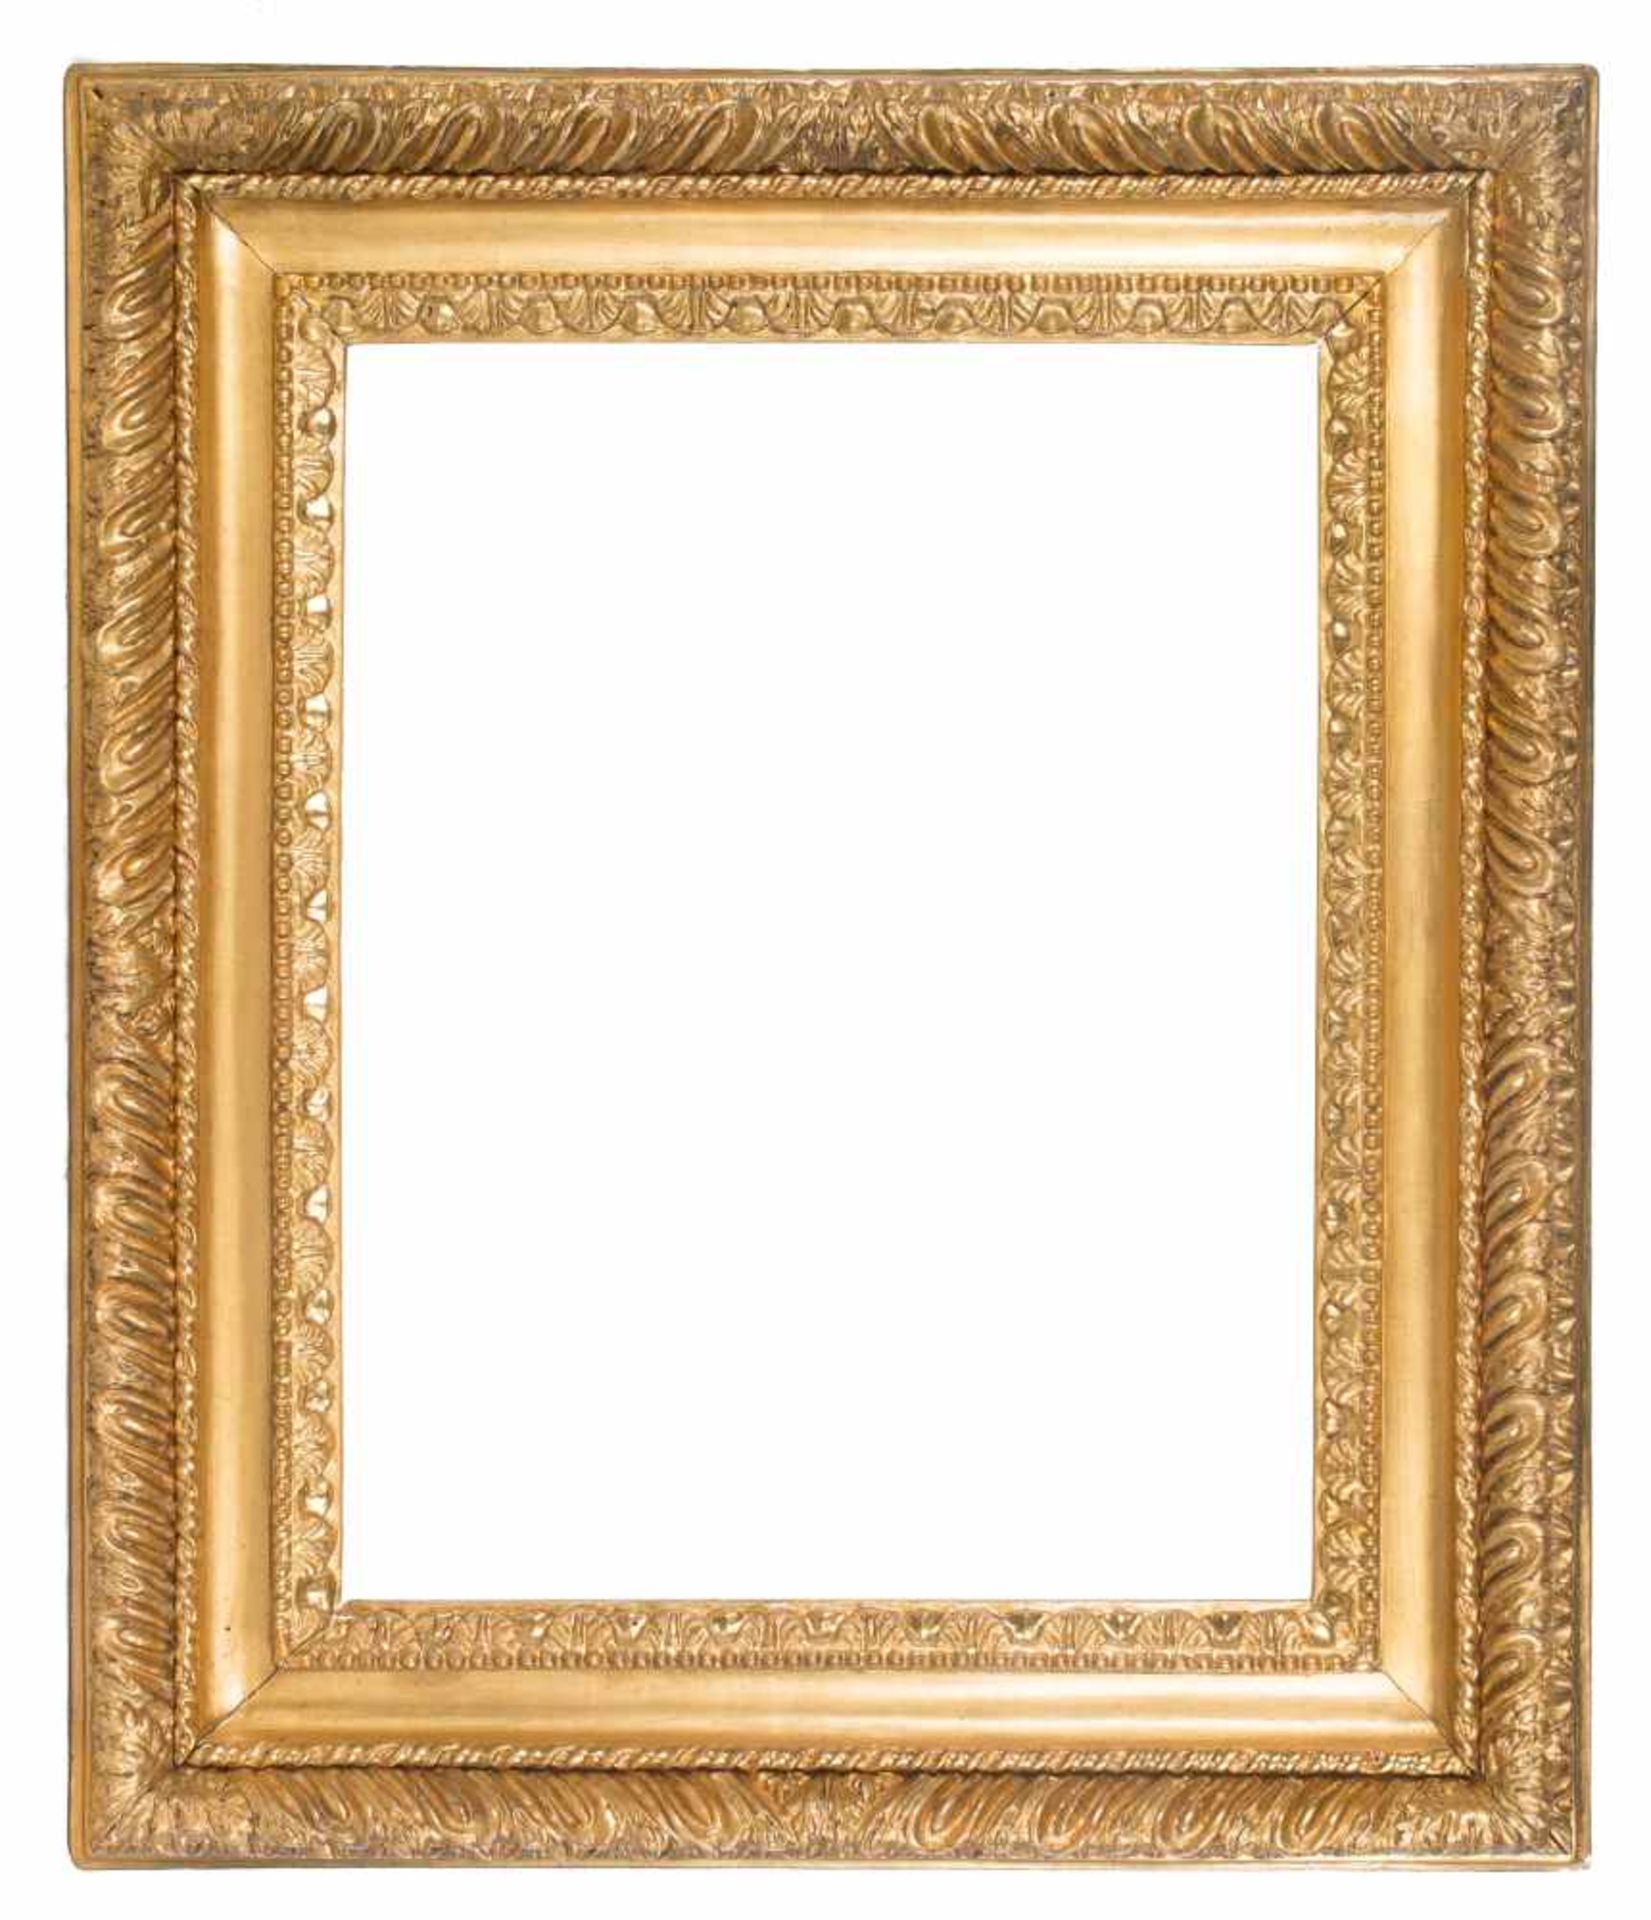 Carved and gilded wooden frame. Italy. 18th century.